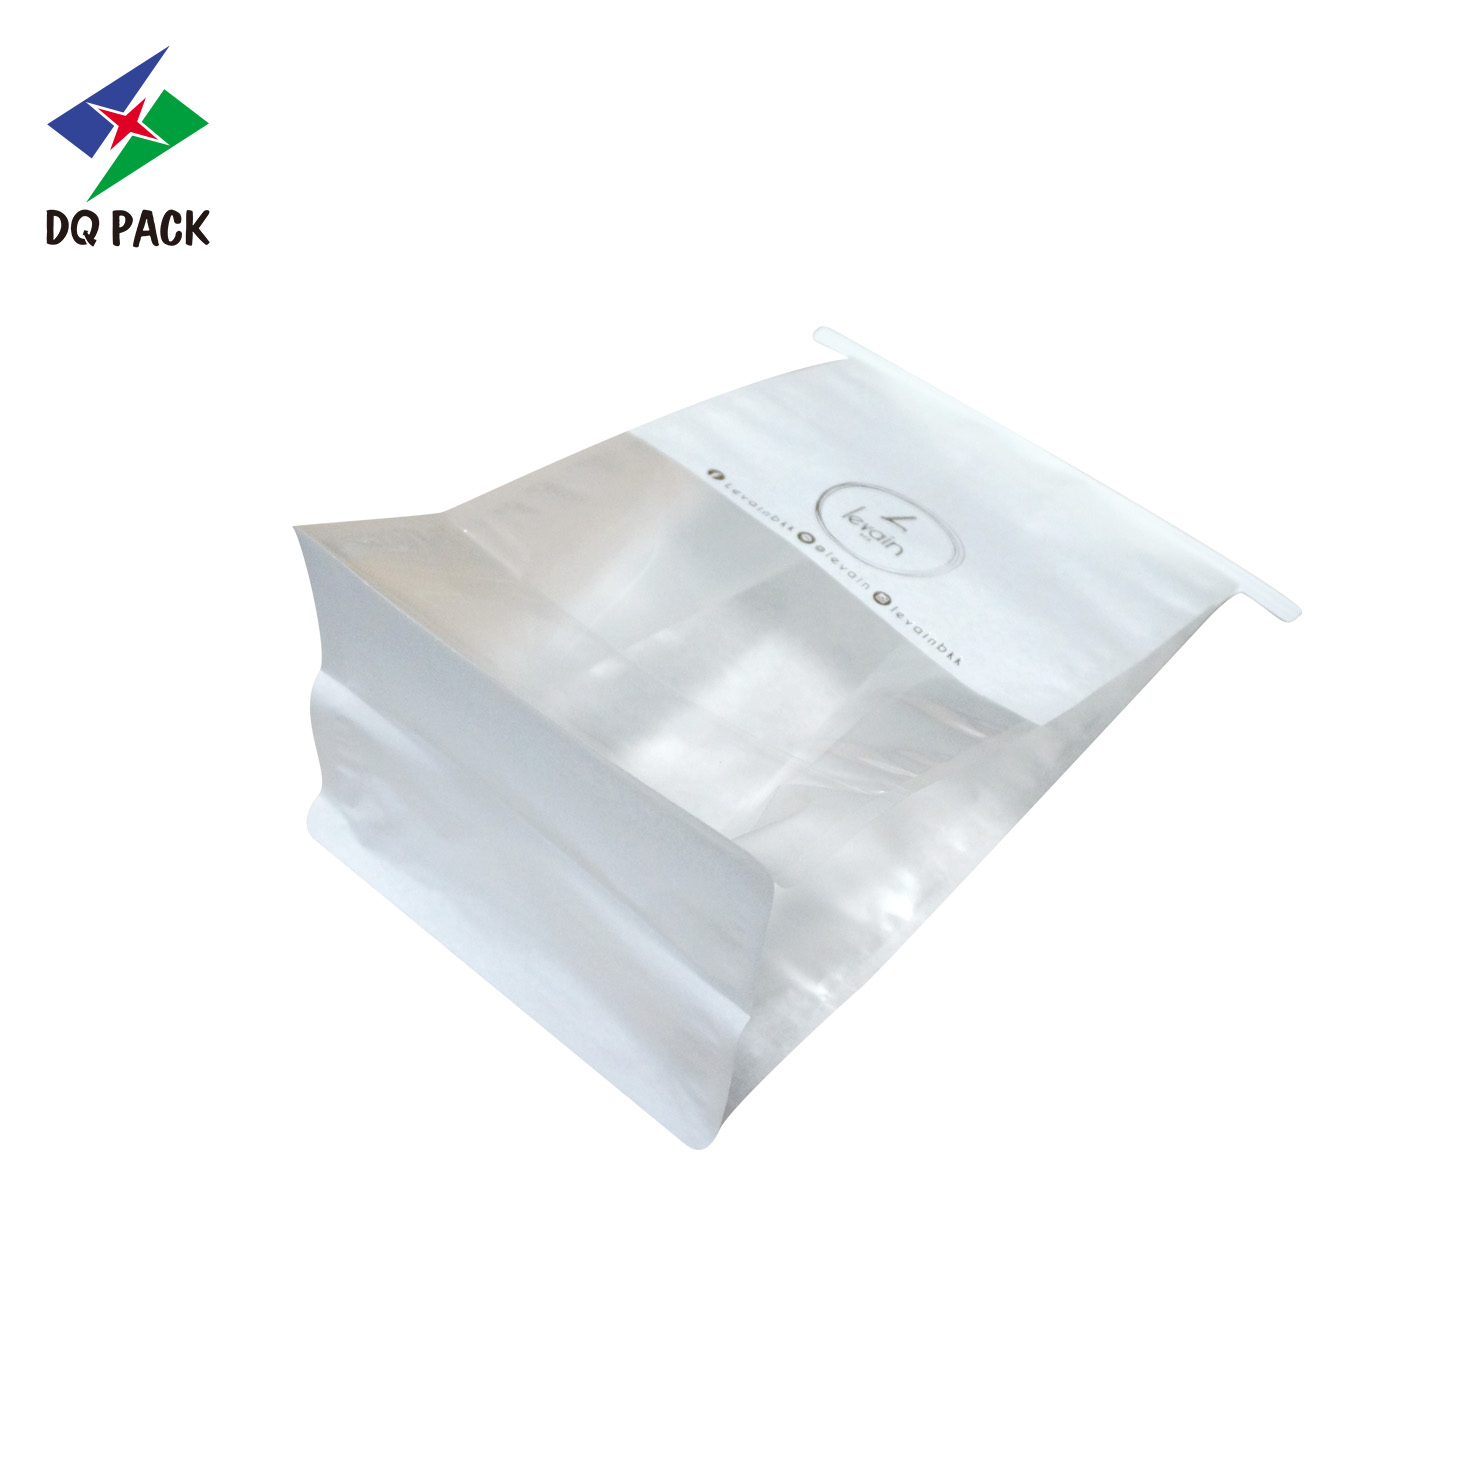 DQ PACK White Kraft Paper Bag Bread Plastic Packaging With Window